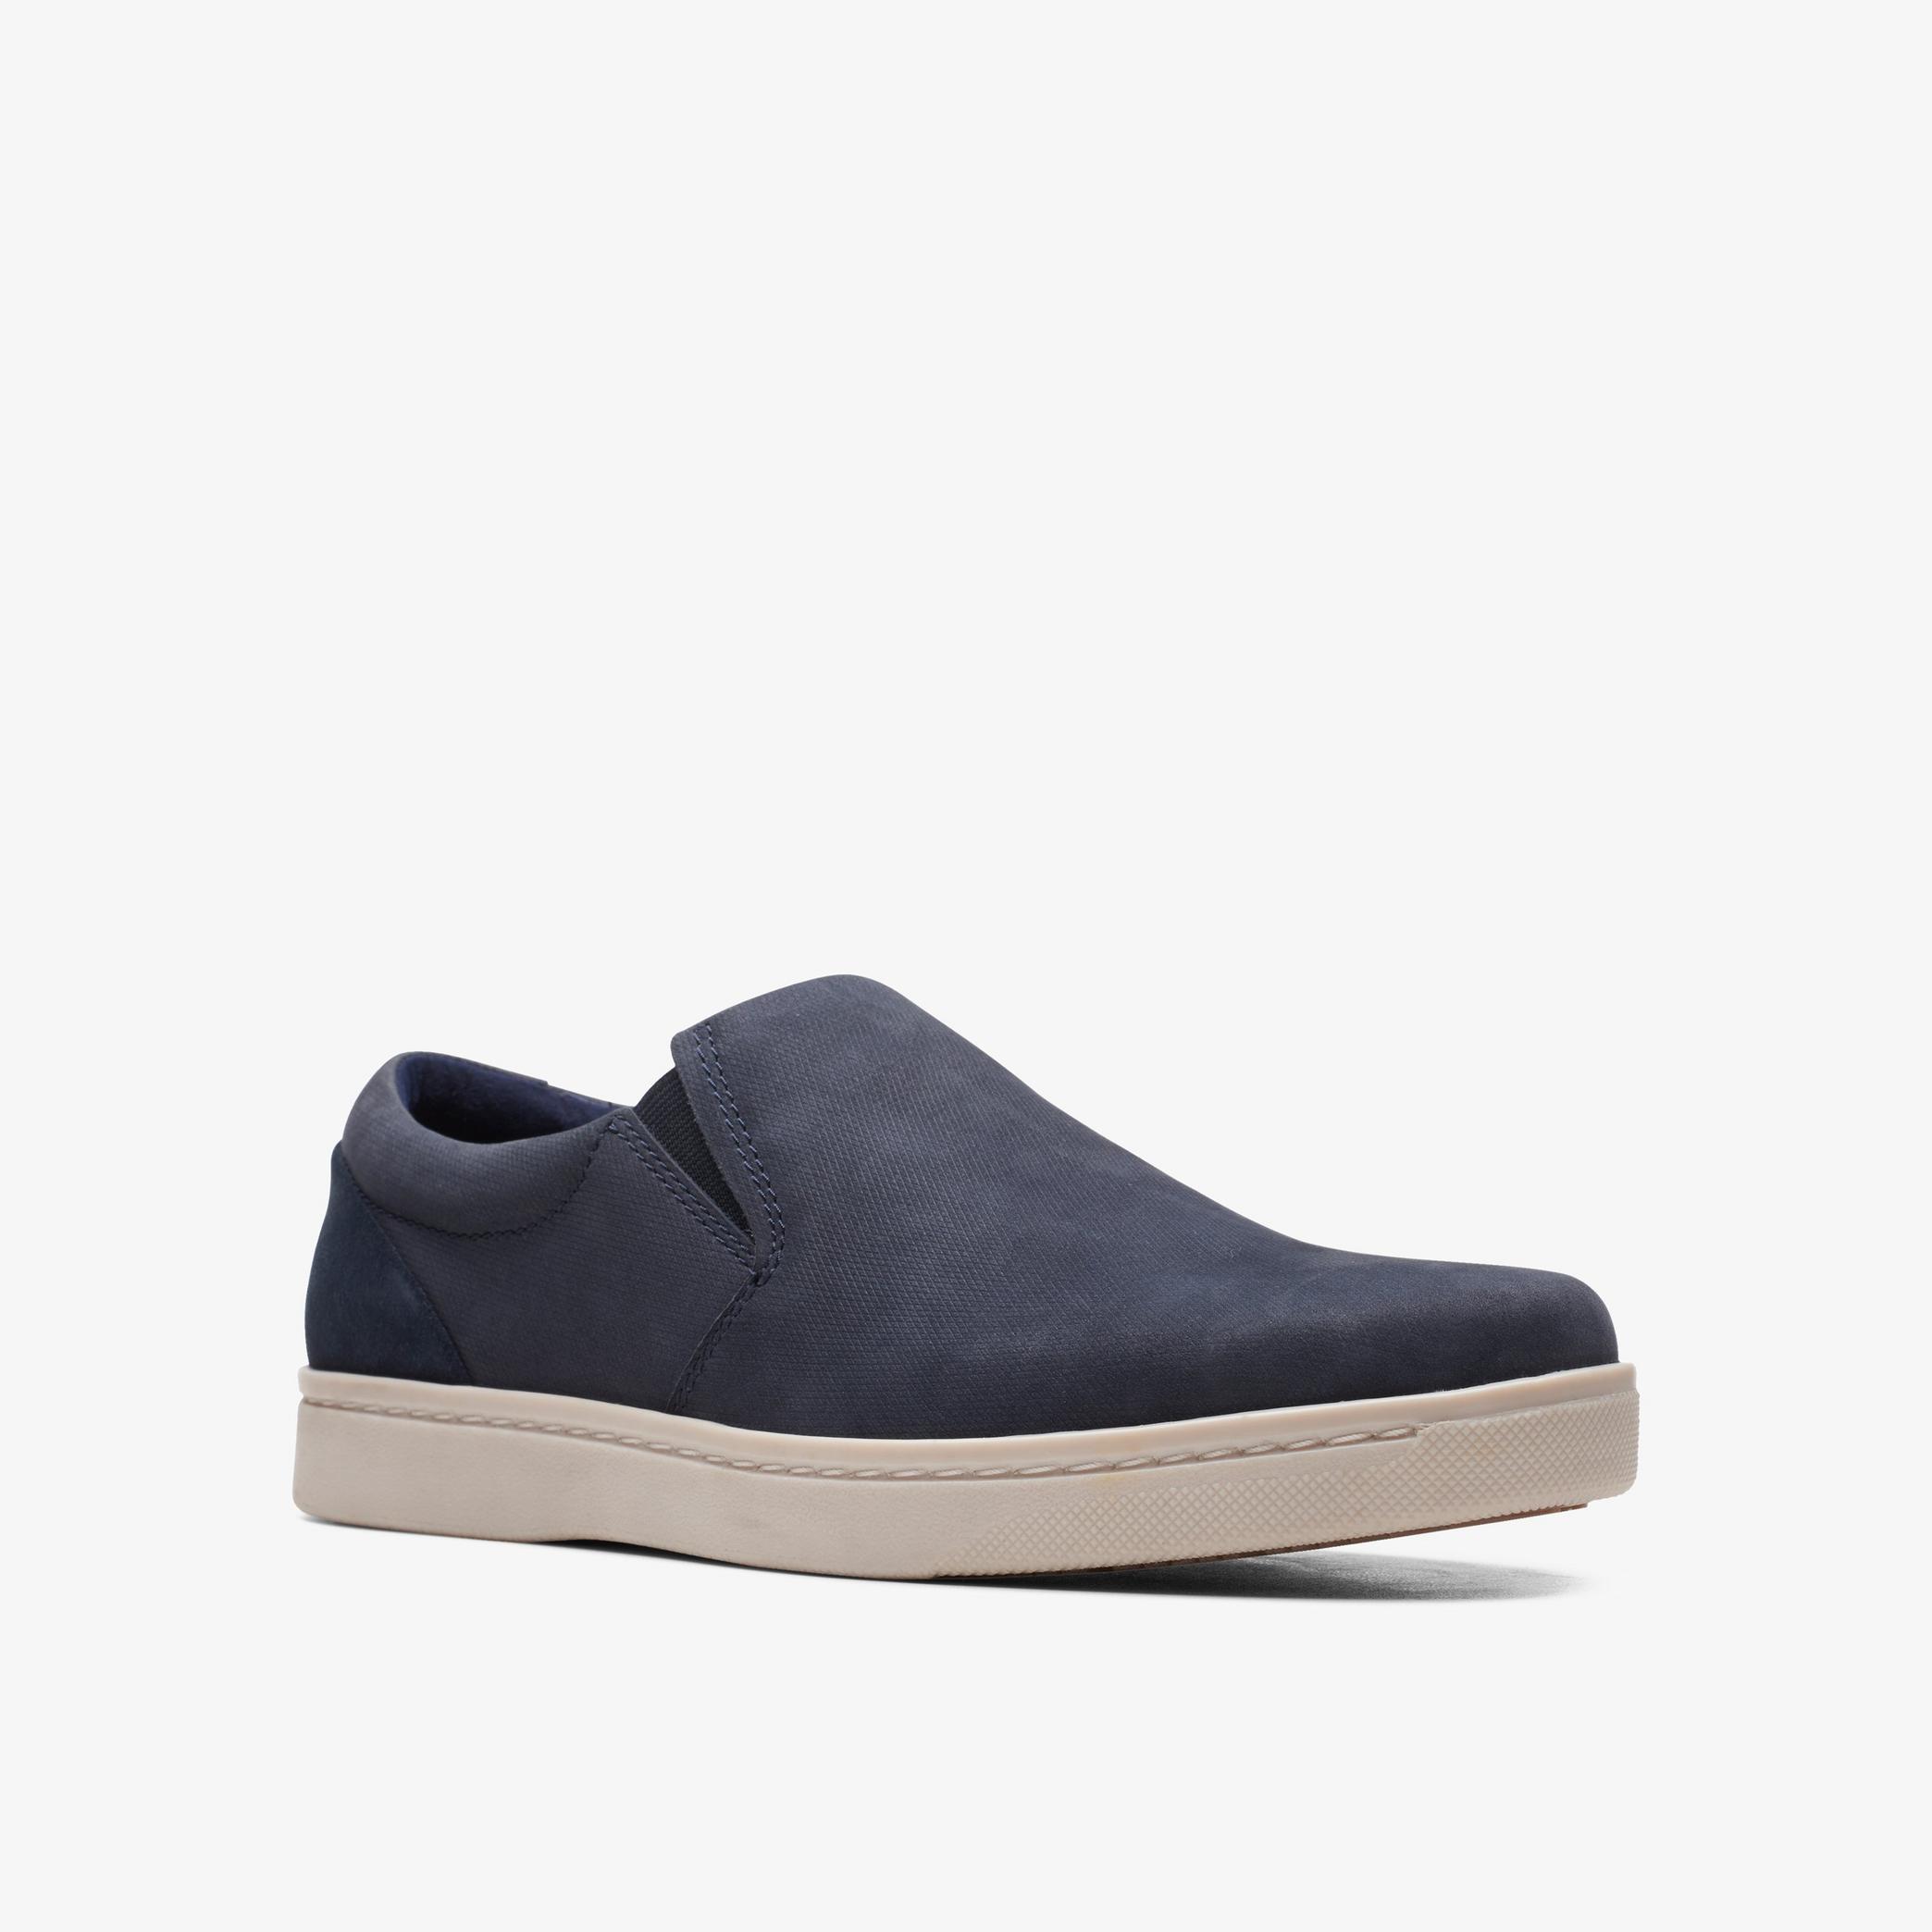 Kitna Free Navy Nubuck Loafers, view 3 of 6